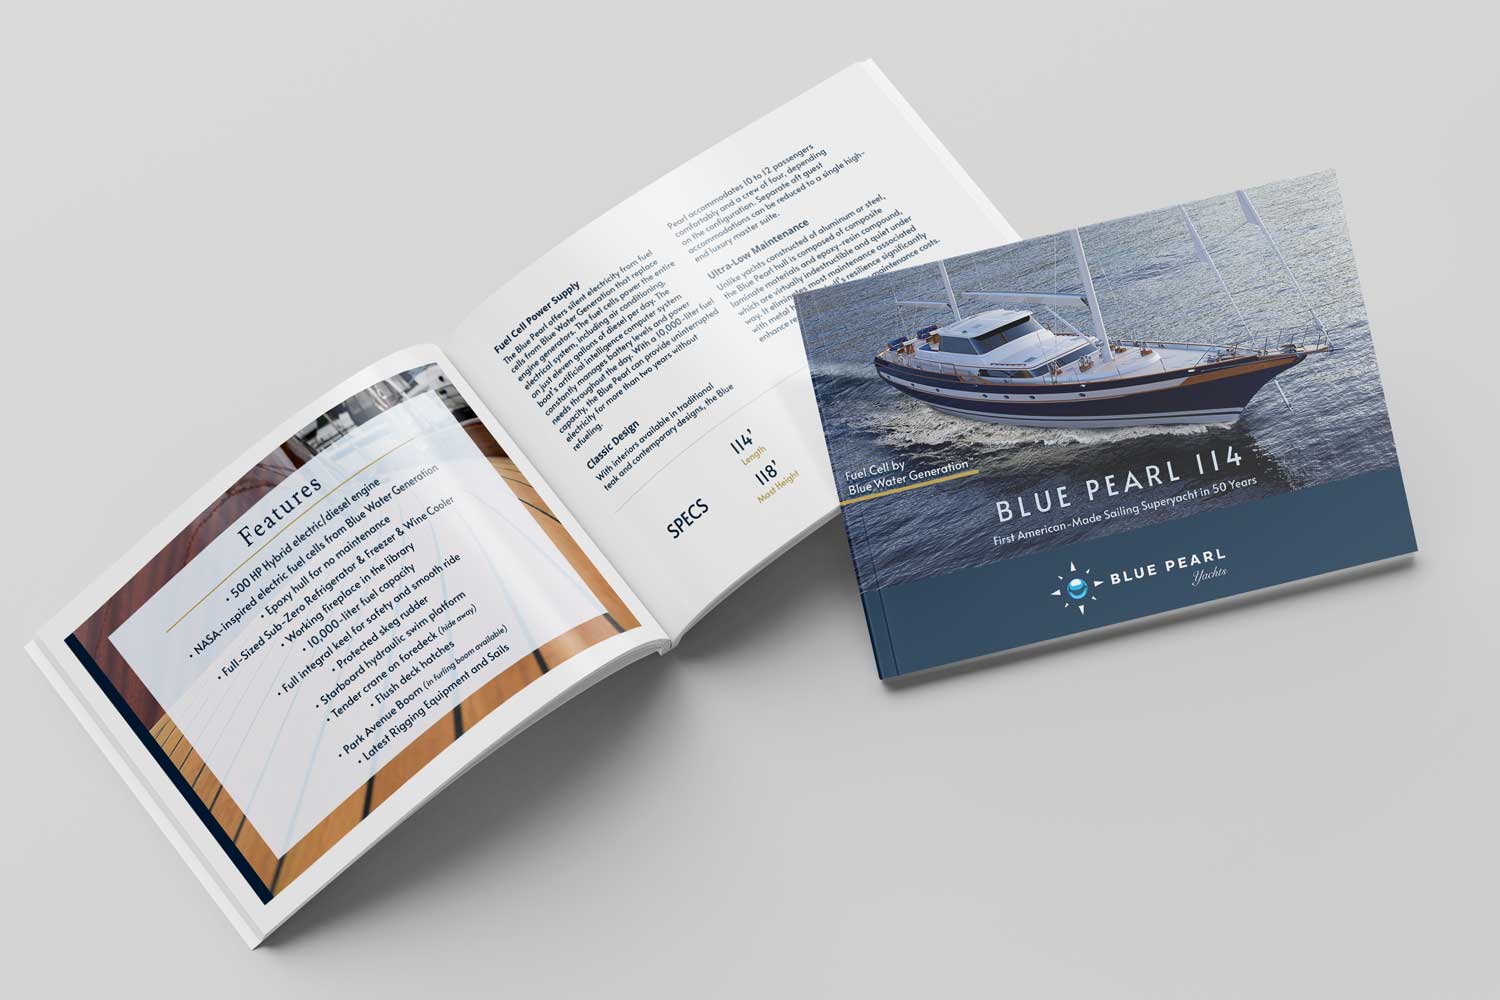 Video brochures Acclaim created for Blue Pearl Yachts to market themselves in Cleveland, Ohio.